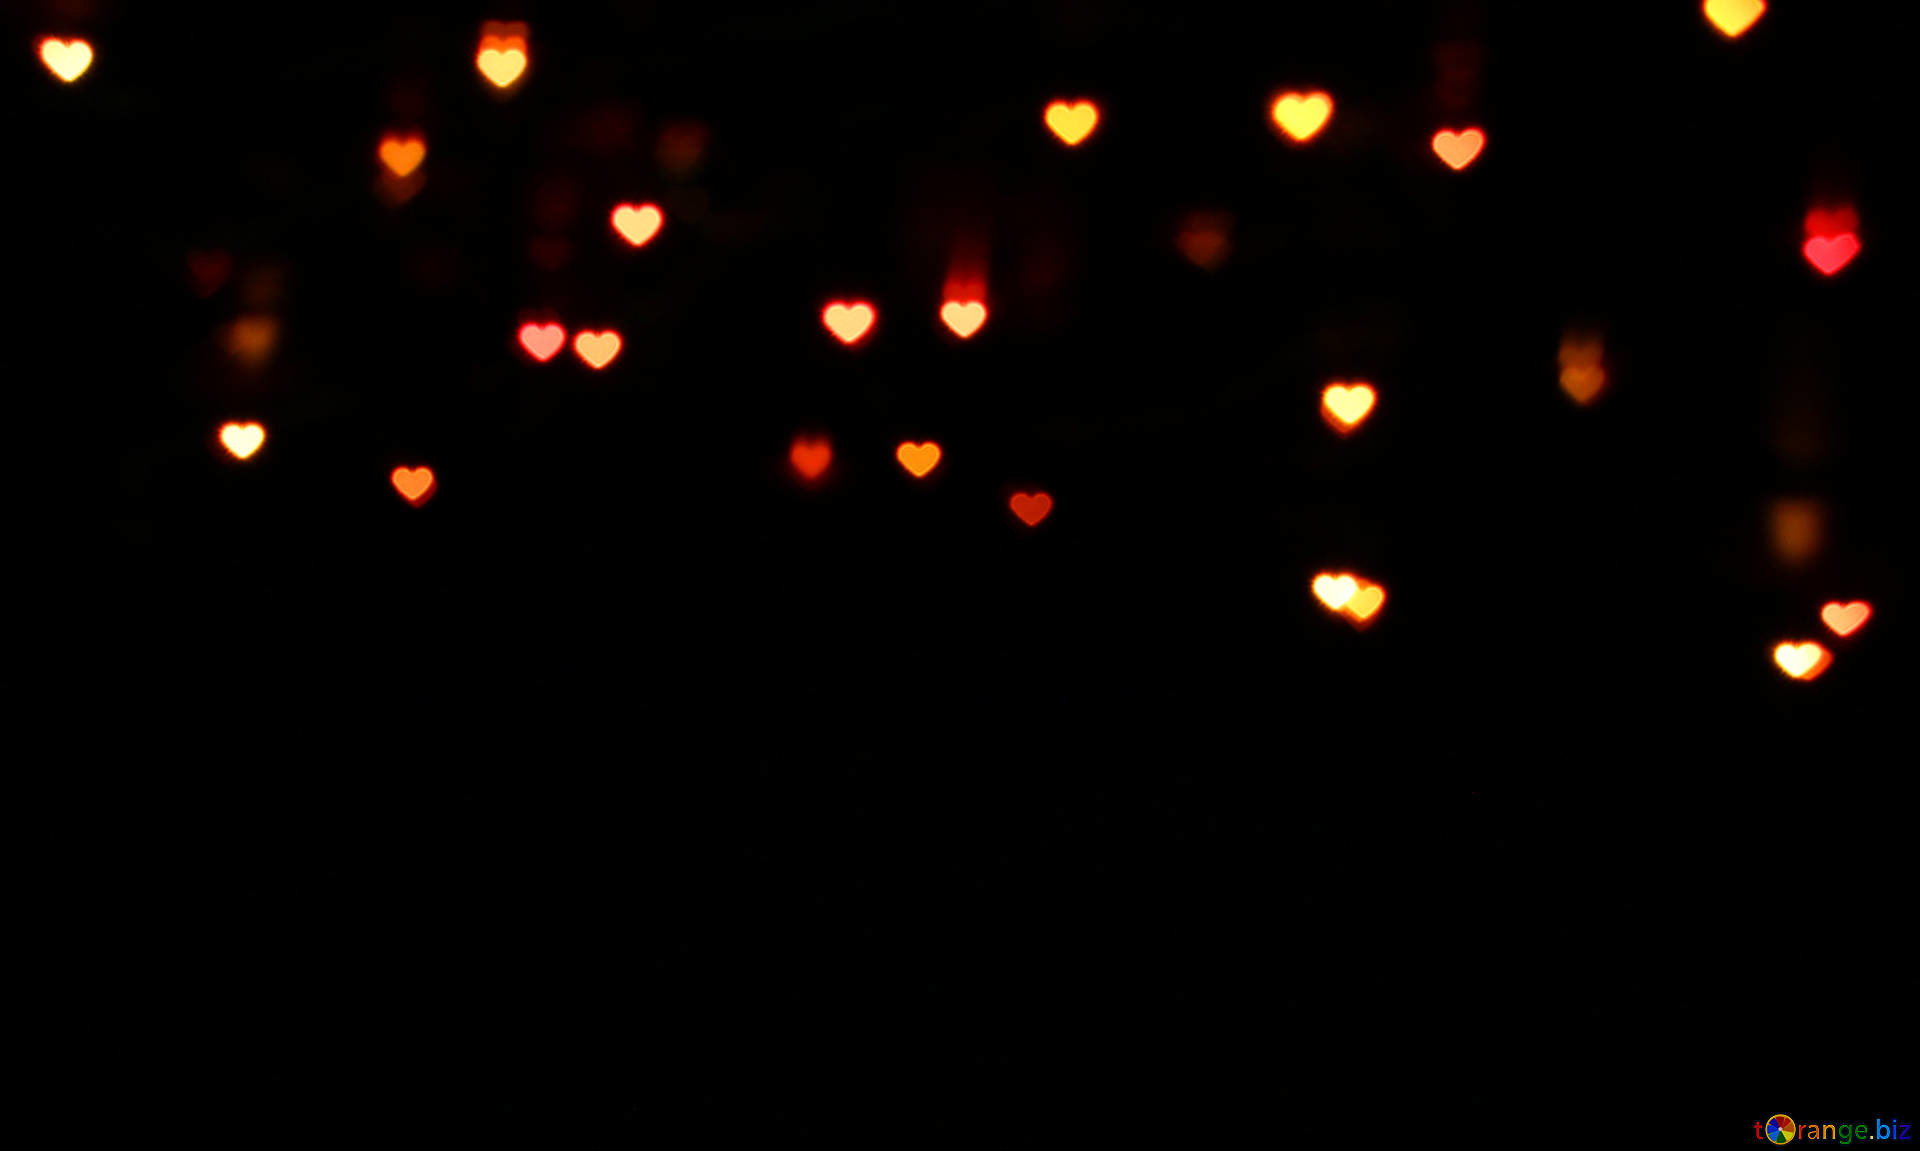 1920x1151 Download free image Lights hearts on dark background in HD wallpaper size  1920px